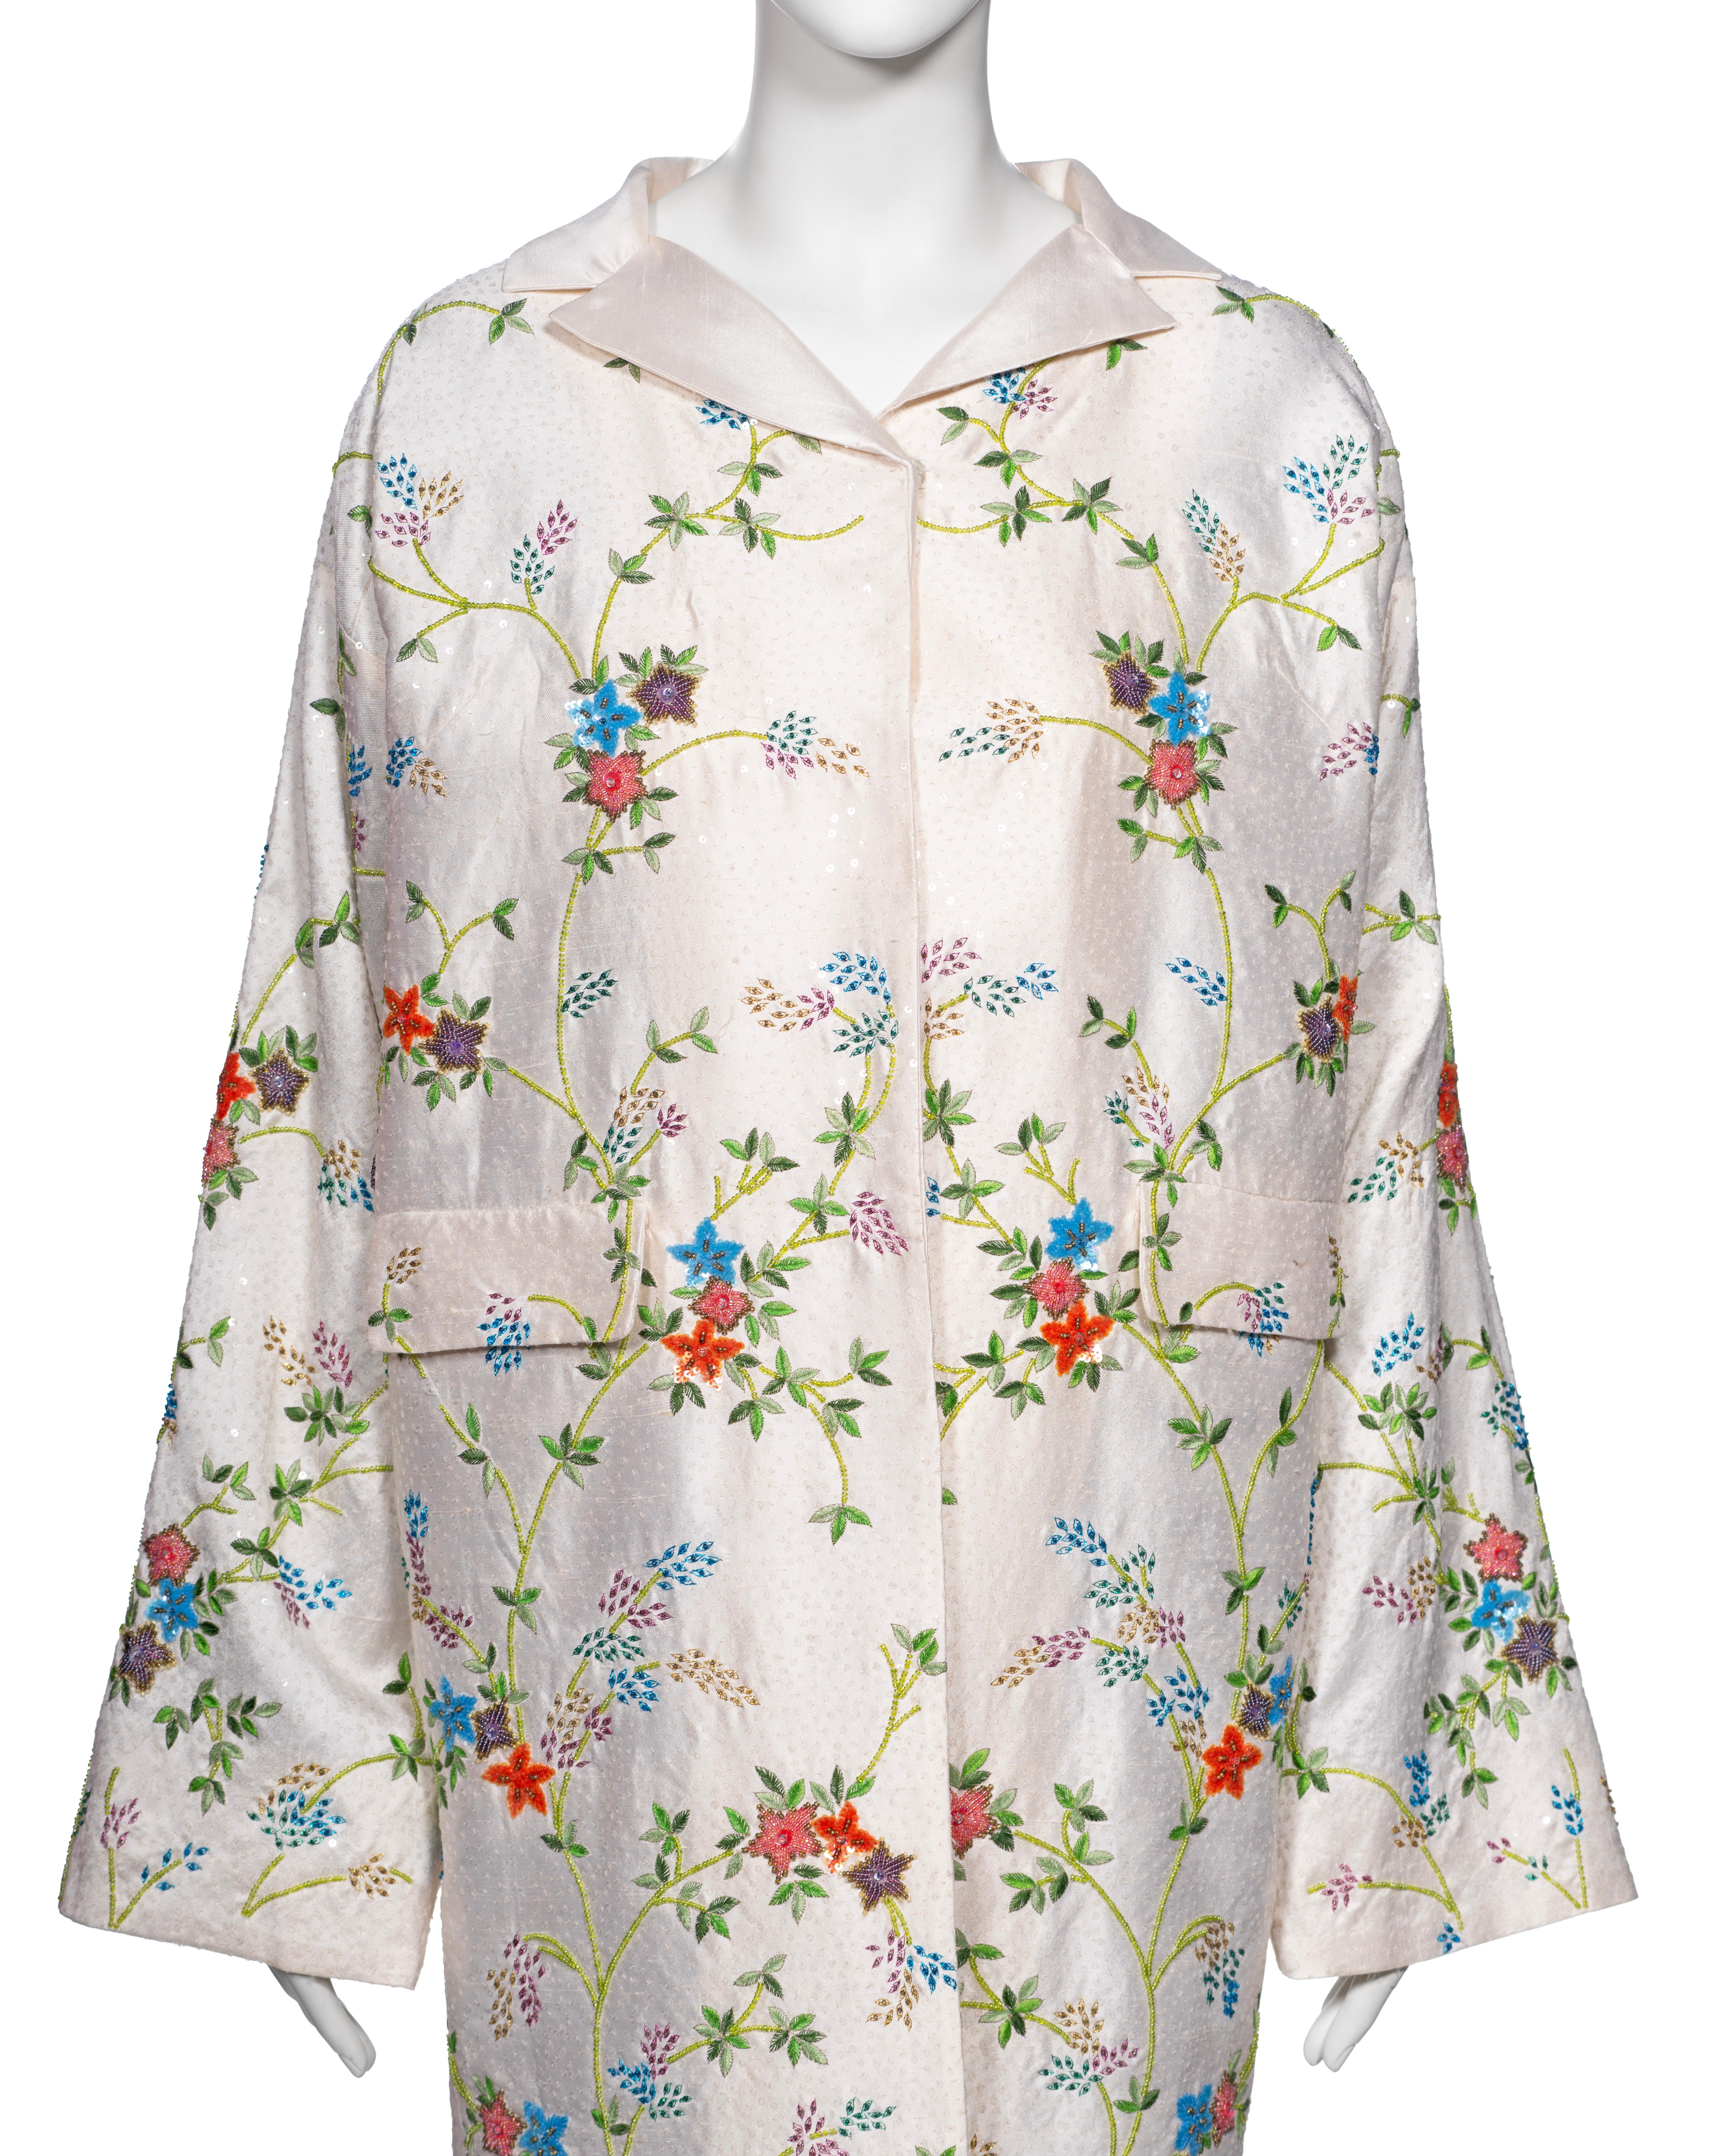 Dolce & Gabbana Hand-Embroidered White Raw Silk Evening Couture Coat, ss 1997 In Excellent Condition For Sale In London, GB